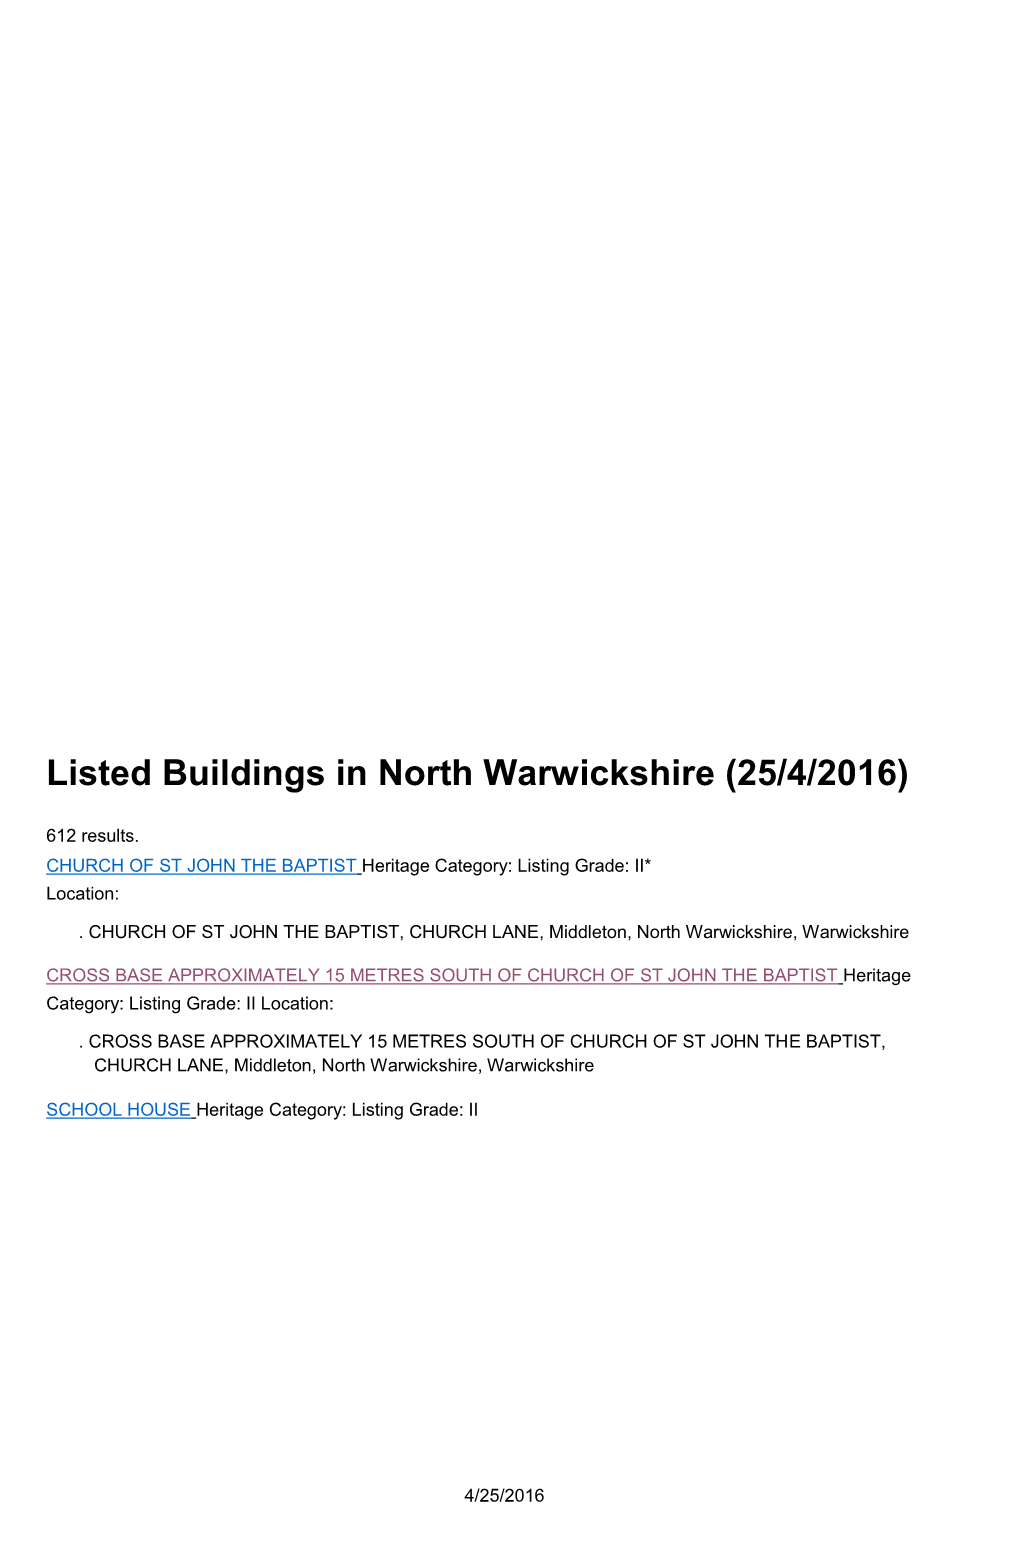 Listed Buildings in North Warwickshire (25/4/2016)